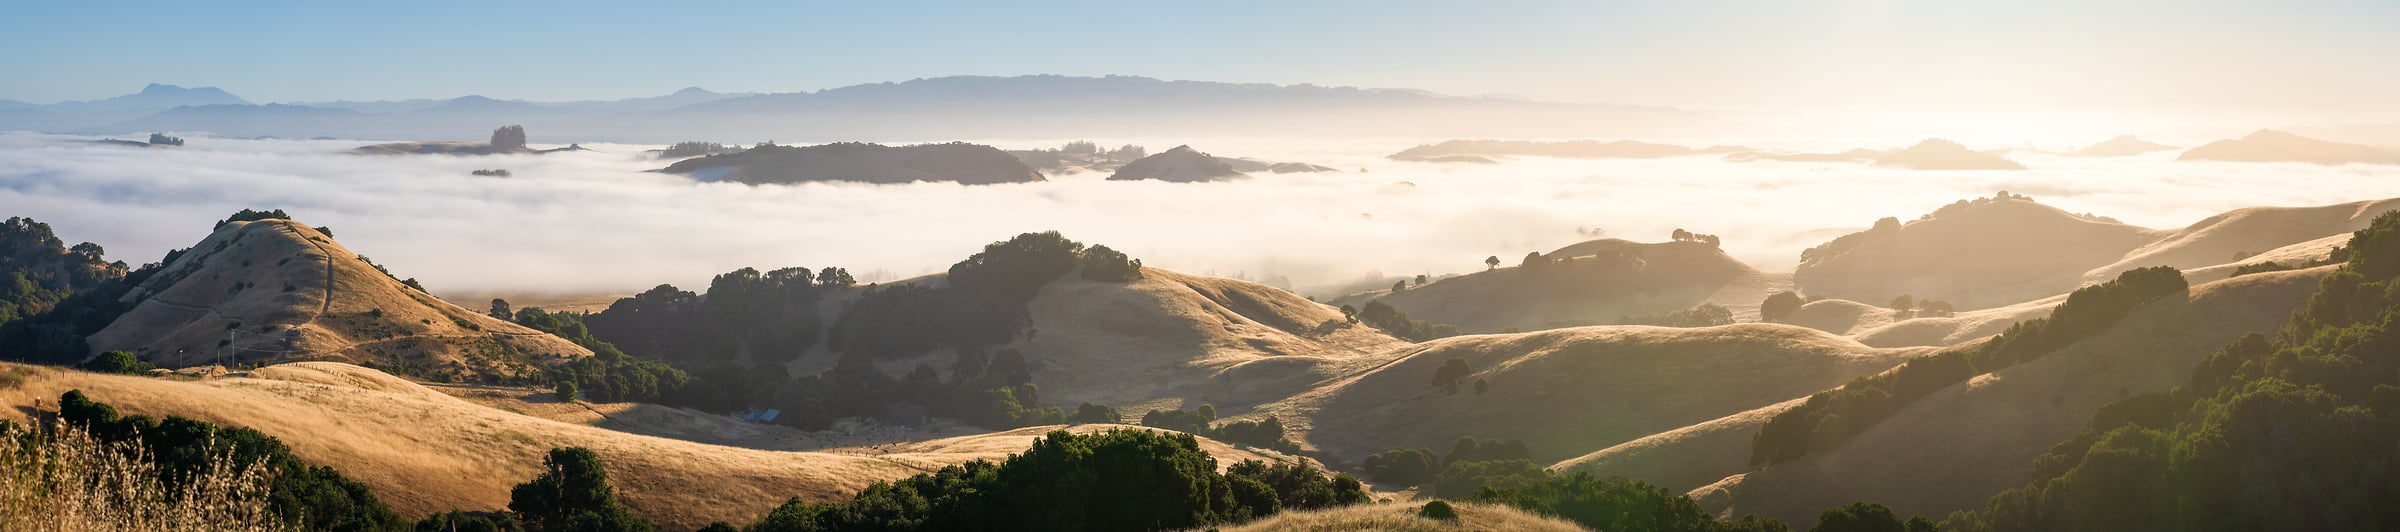 291 megapixels! A very high resolution, large-format VAST photo print of rolling hills at sunrise with fog; panorama photograph created by Jeff Lewis in Petaluma, California